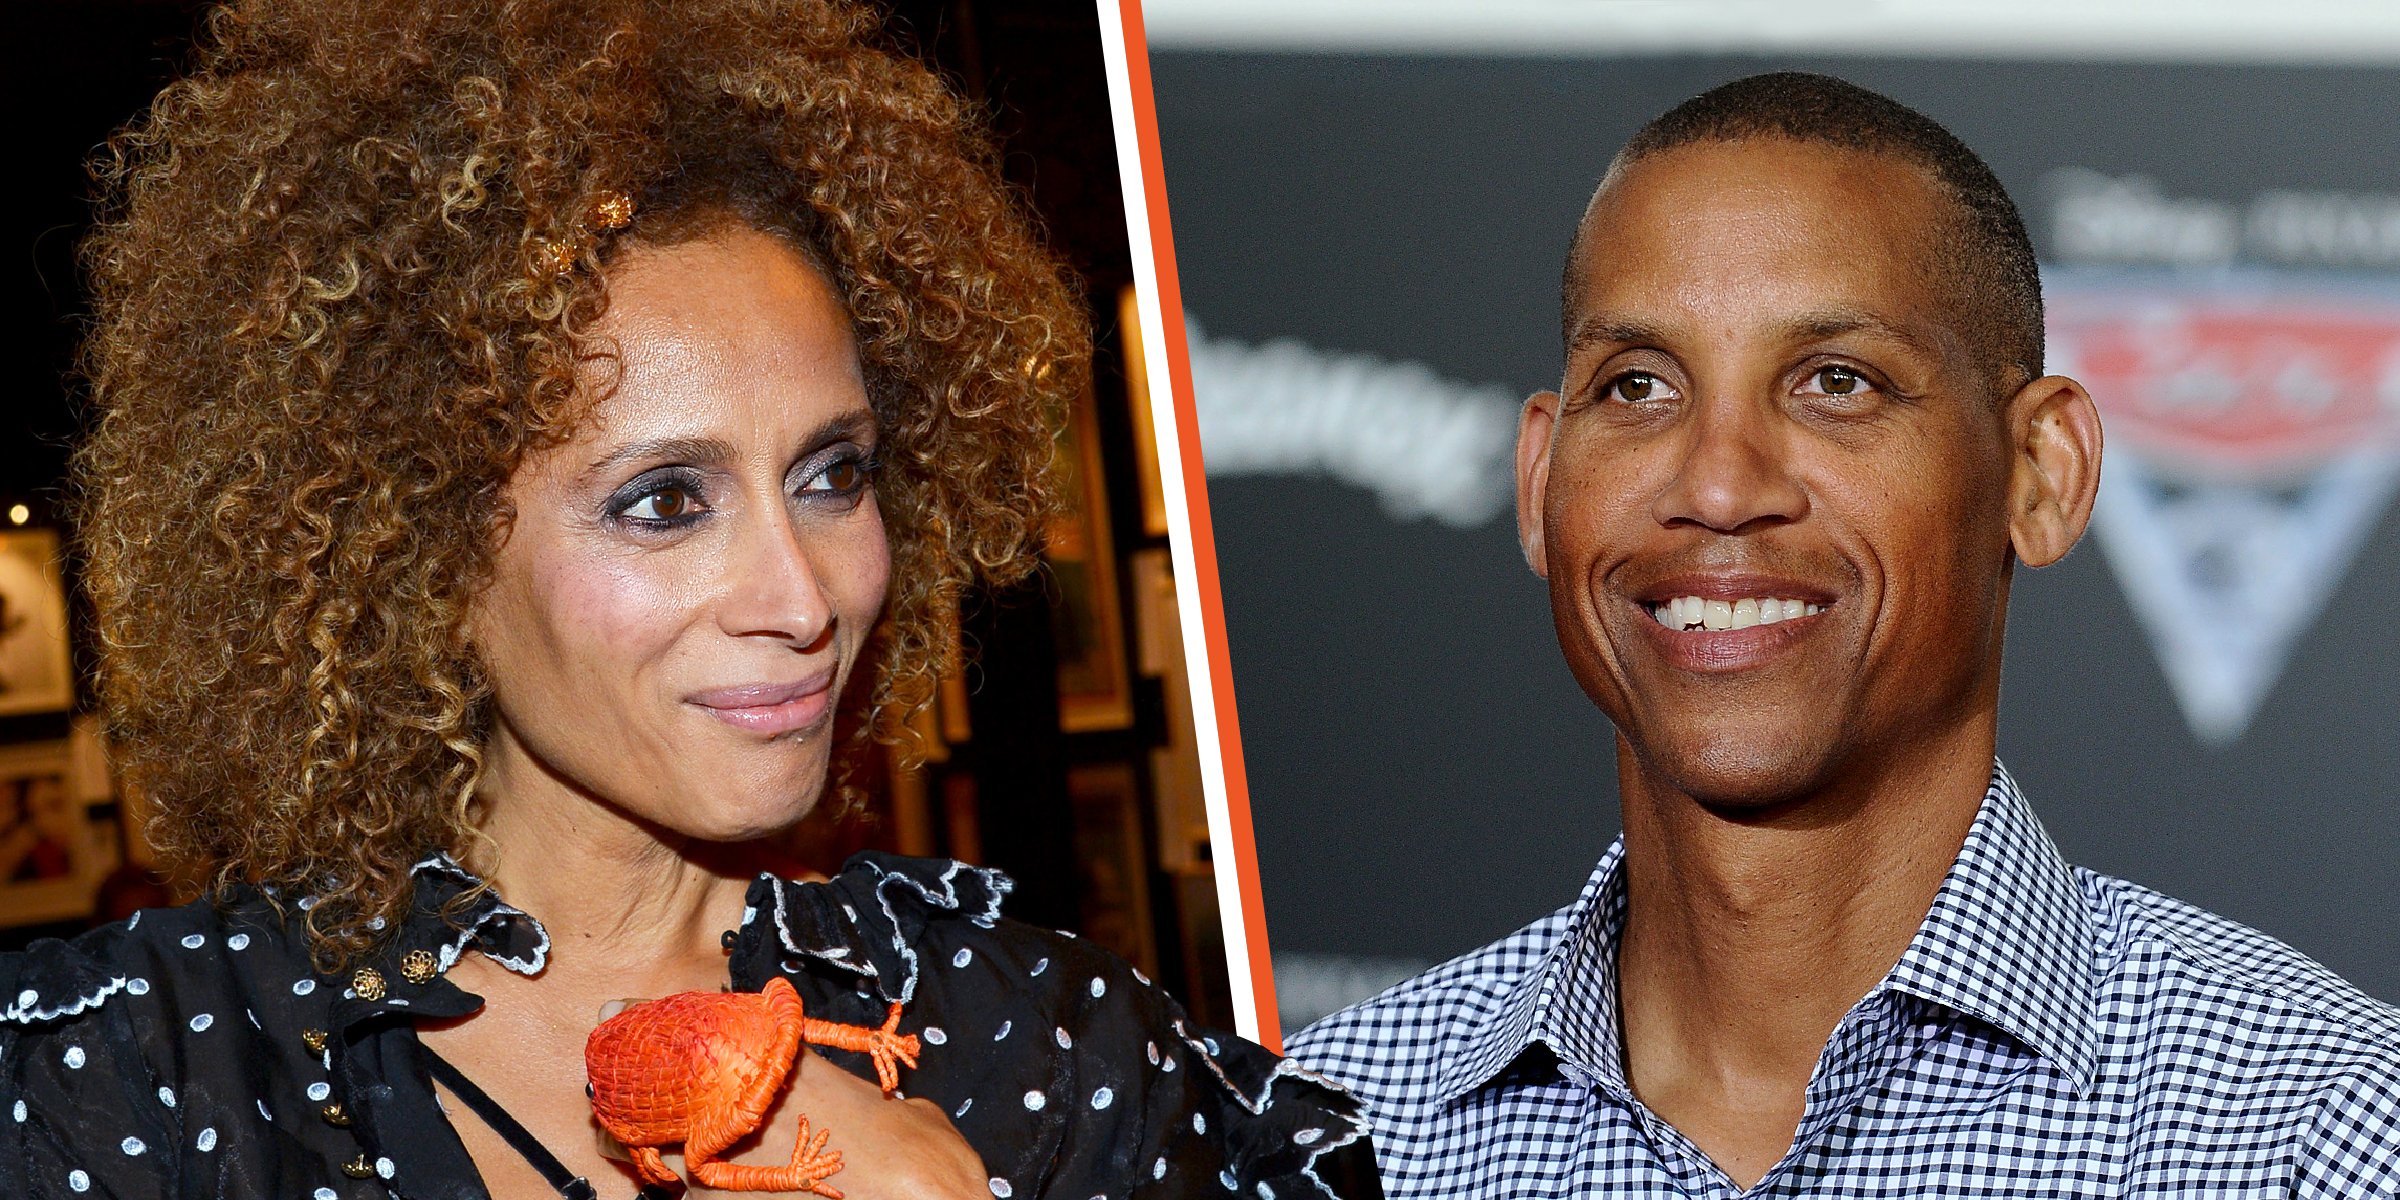 Marita Stavrou Is Known for Being Reggie Miller's Exwife What We Know